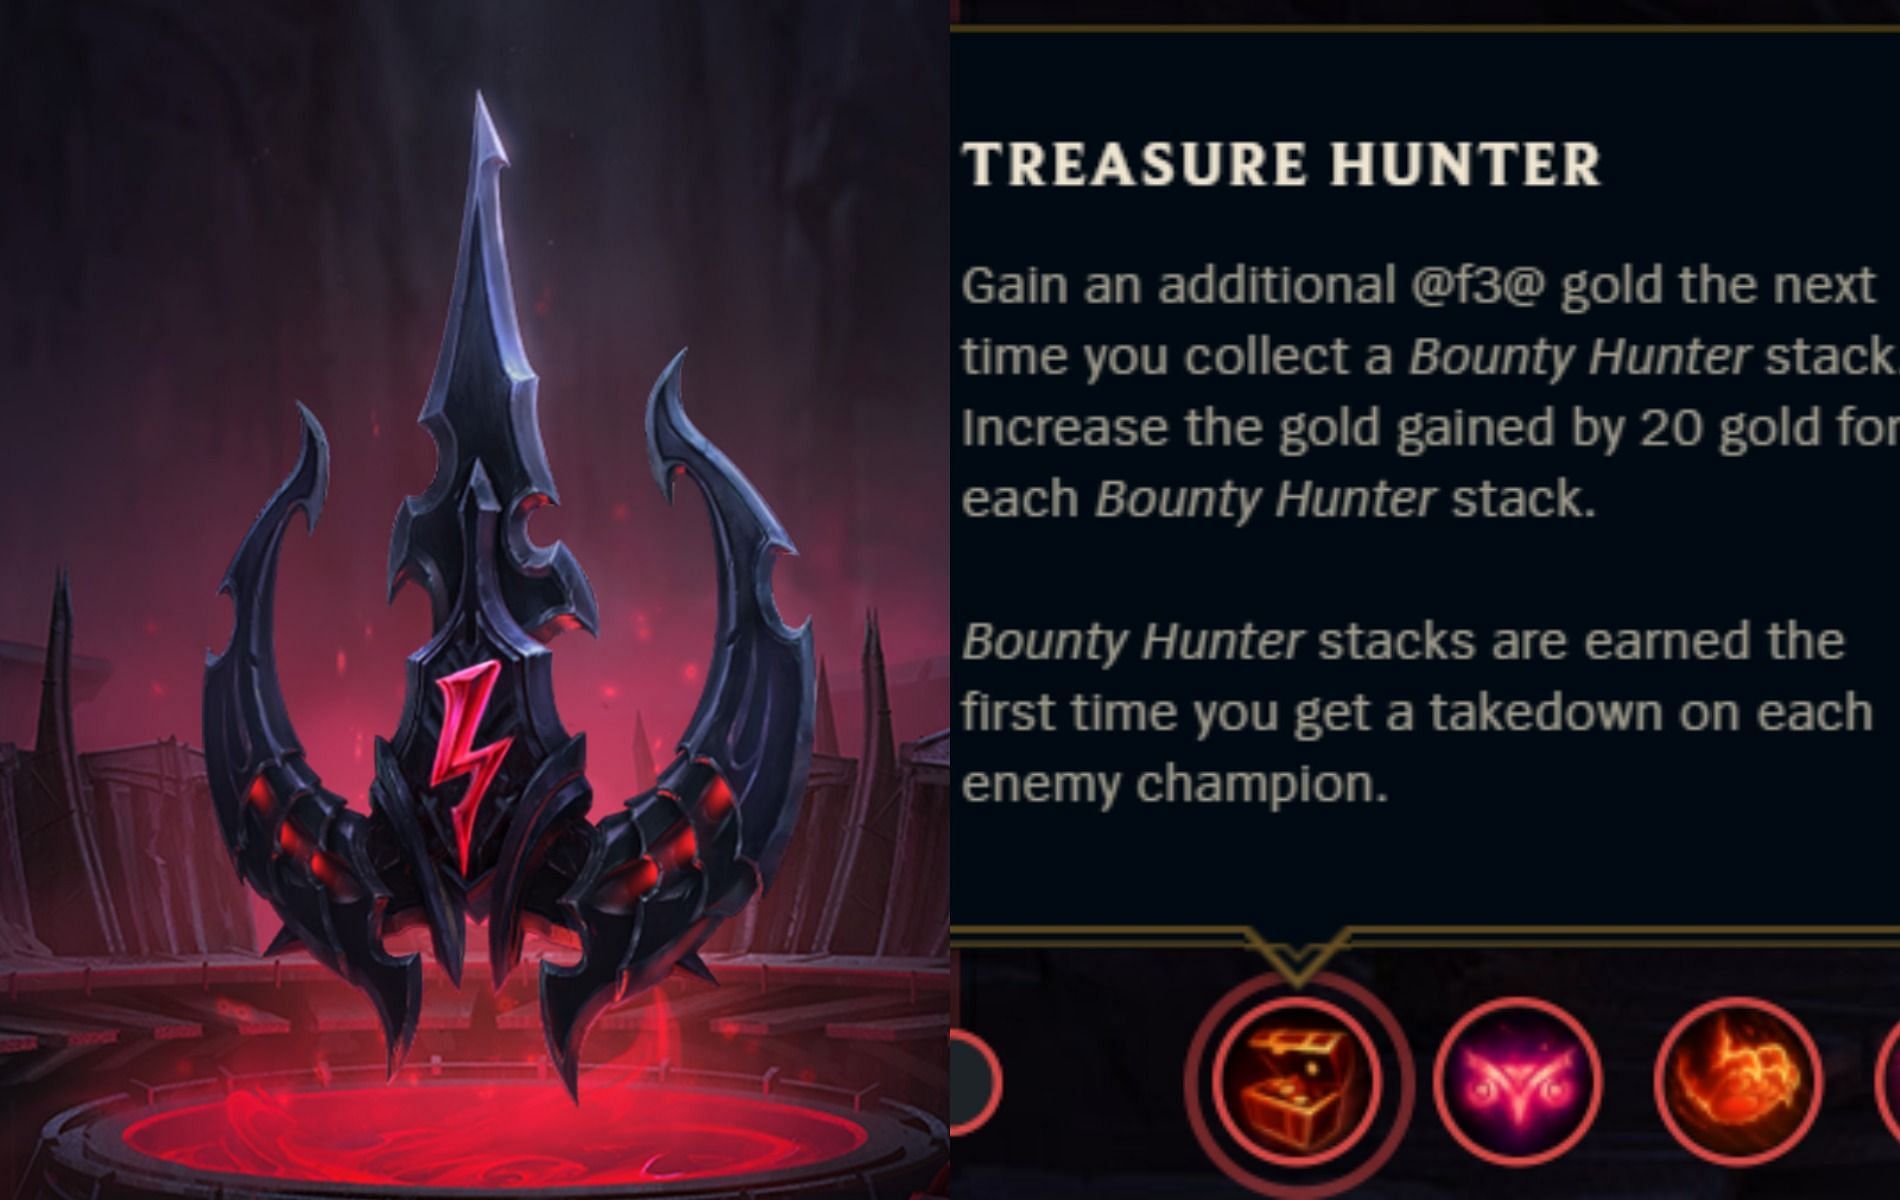 Treasure Hunter will look to capitalize on unique takedowns and bounties in League of Legends (Images via League of Legends PBE)